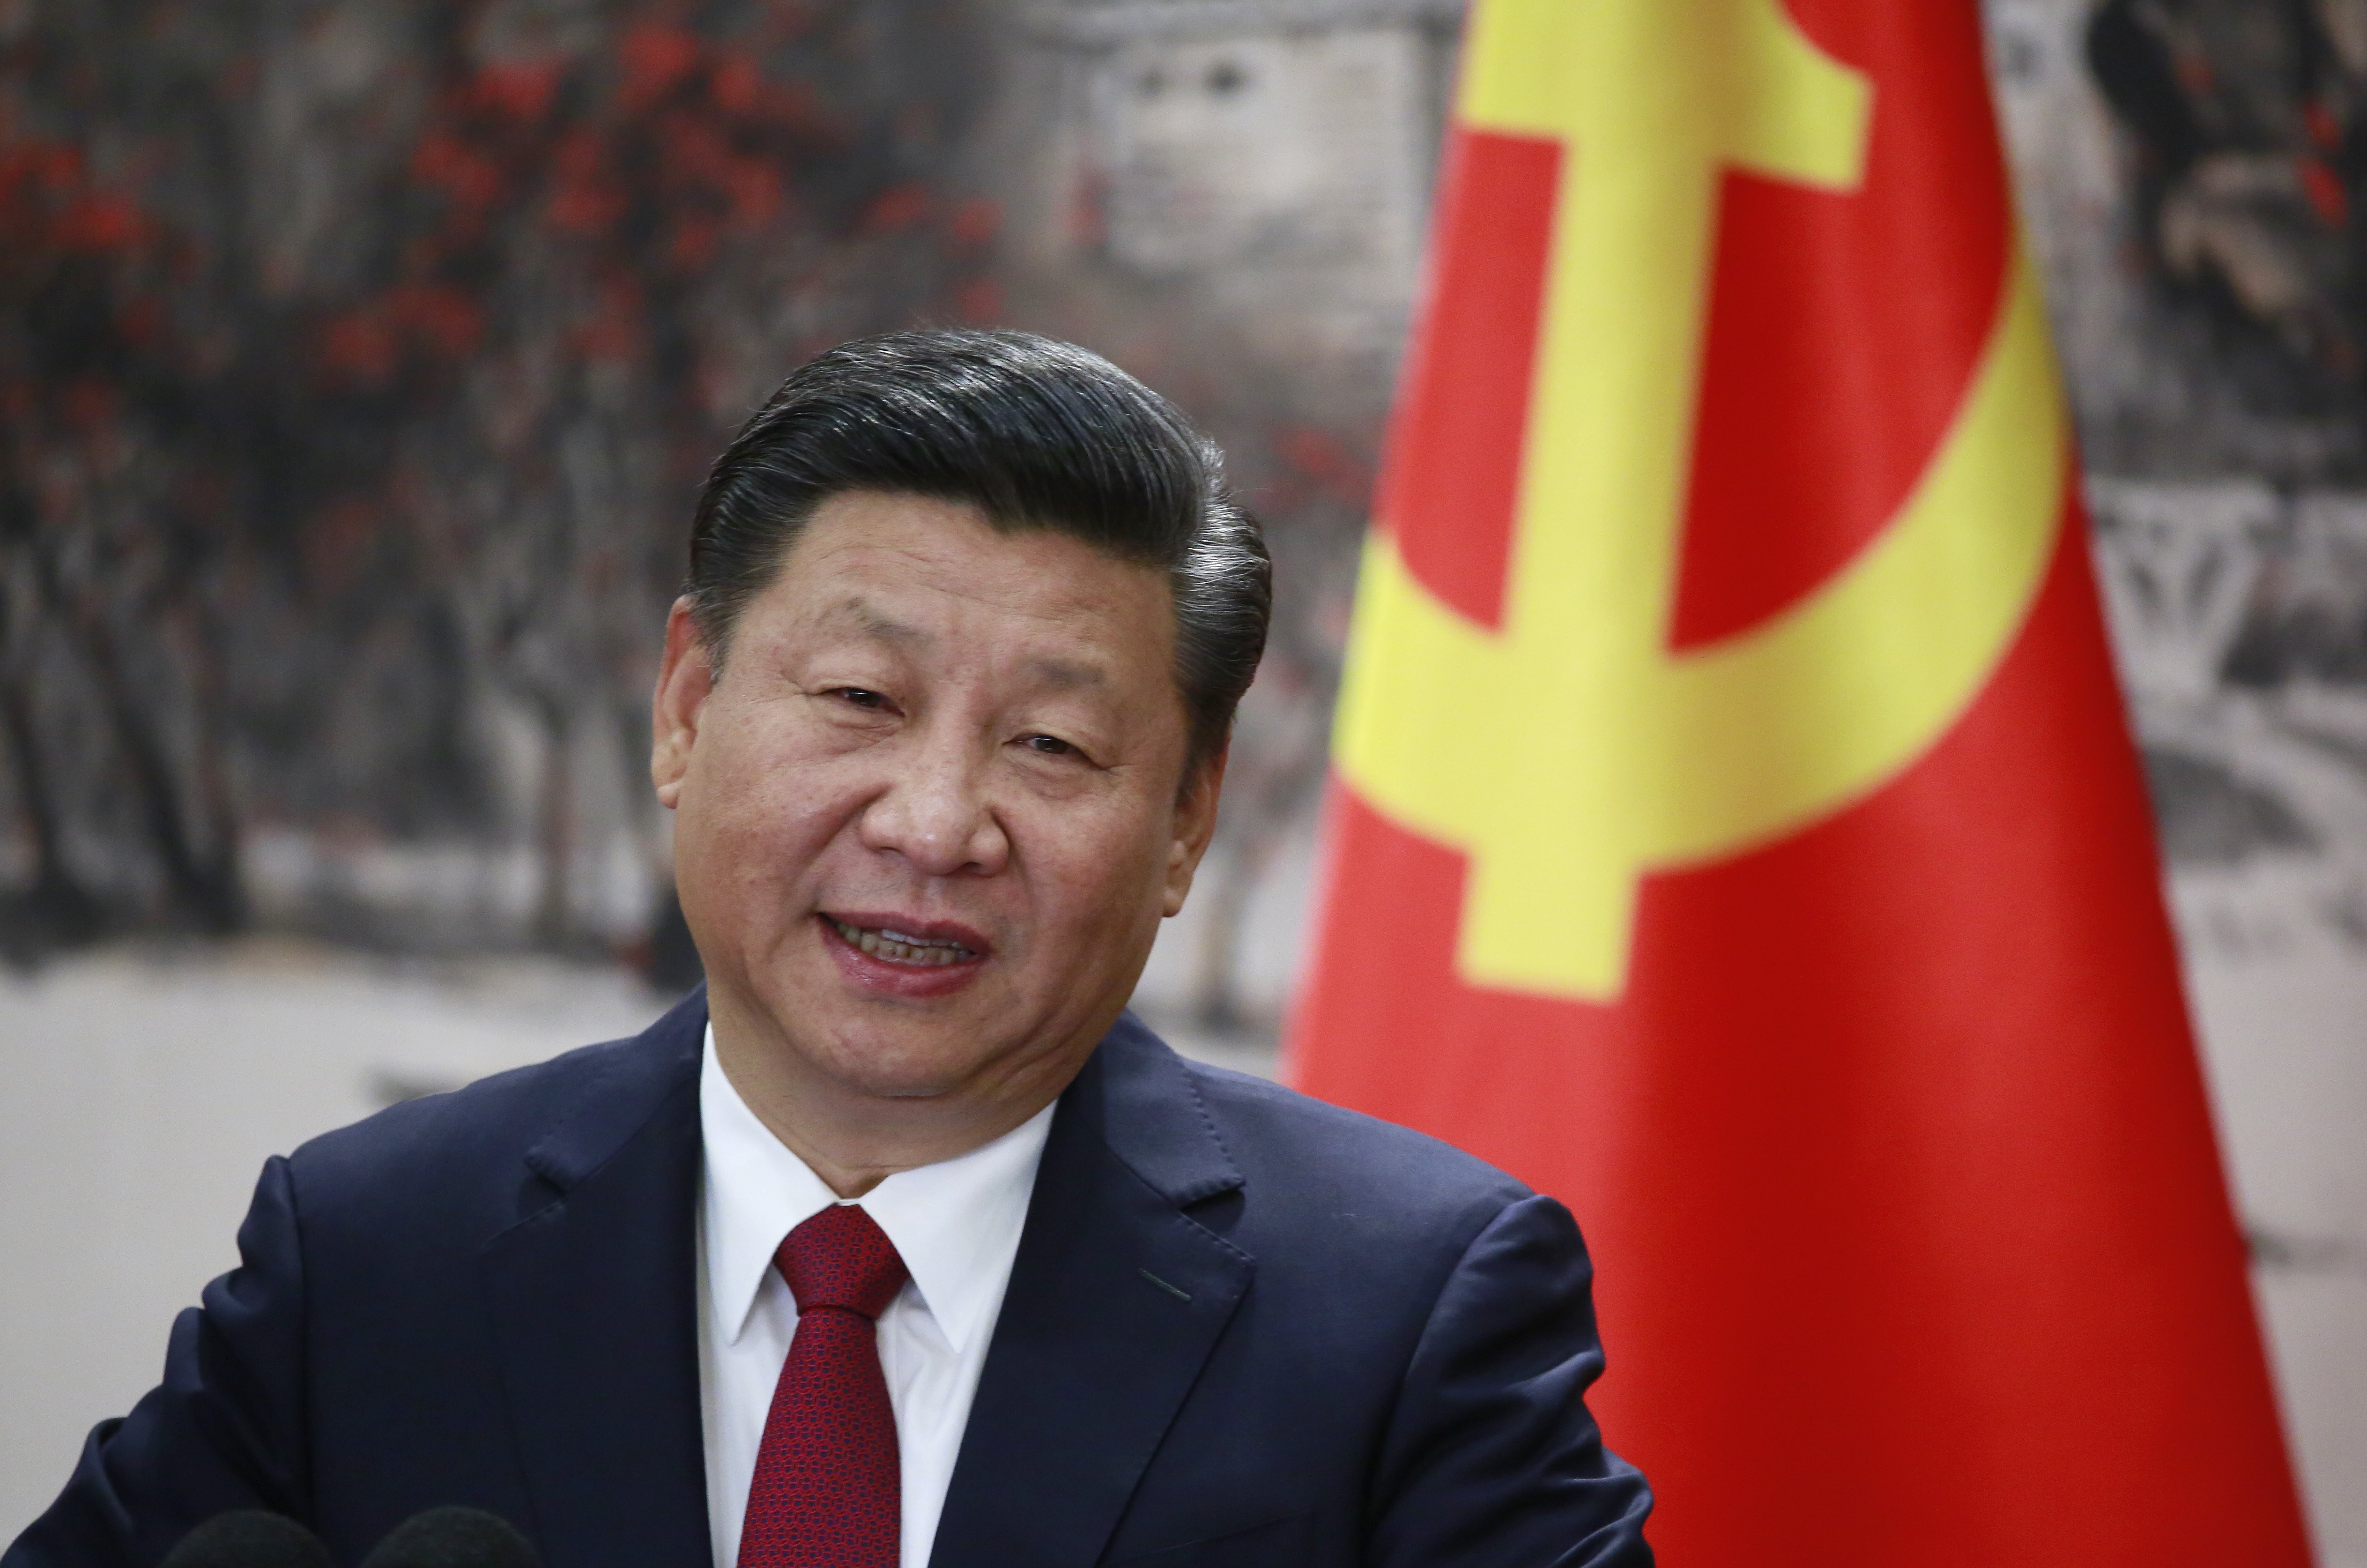 Chinese President Xi Jinping speaks at a press conference in Beijing last Wednesday. Photo: EPA-EFE